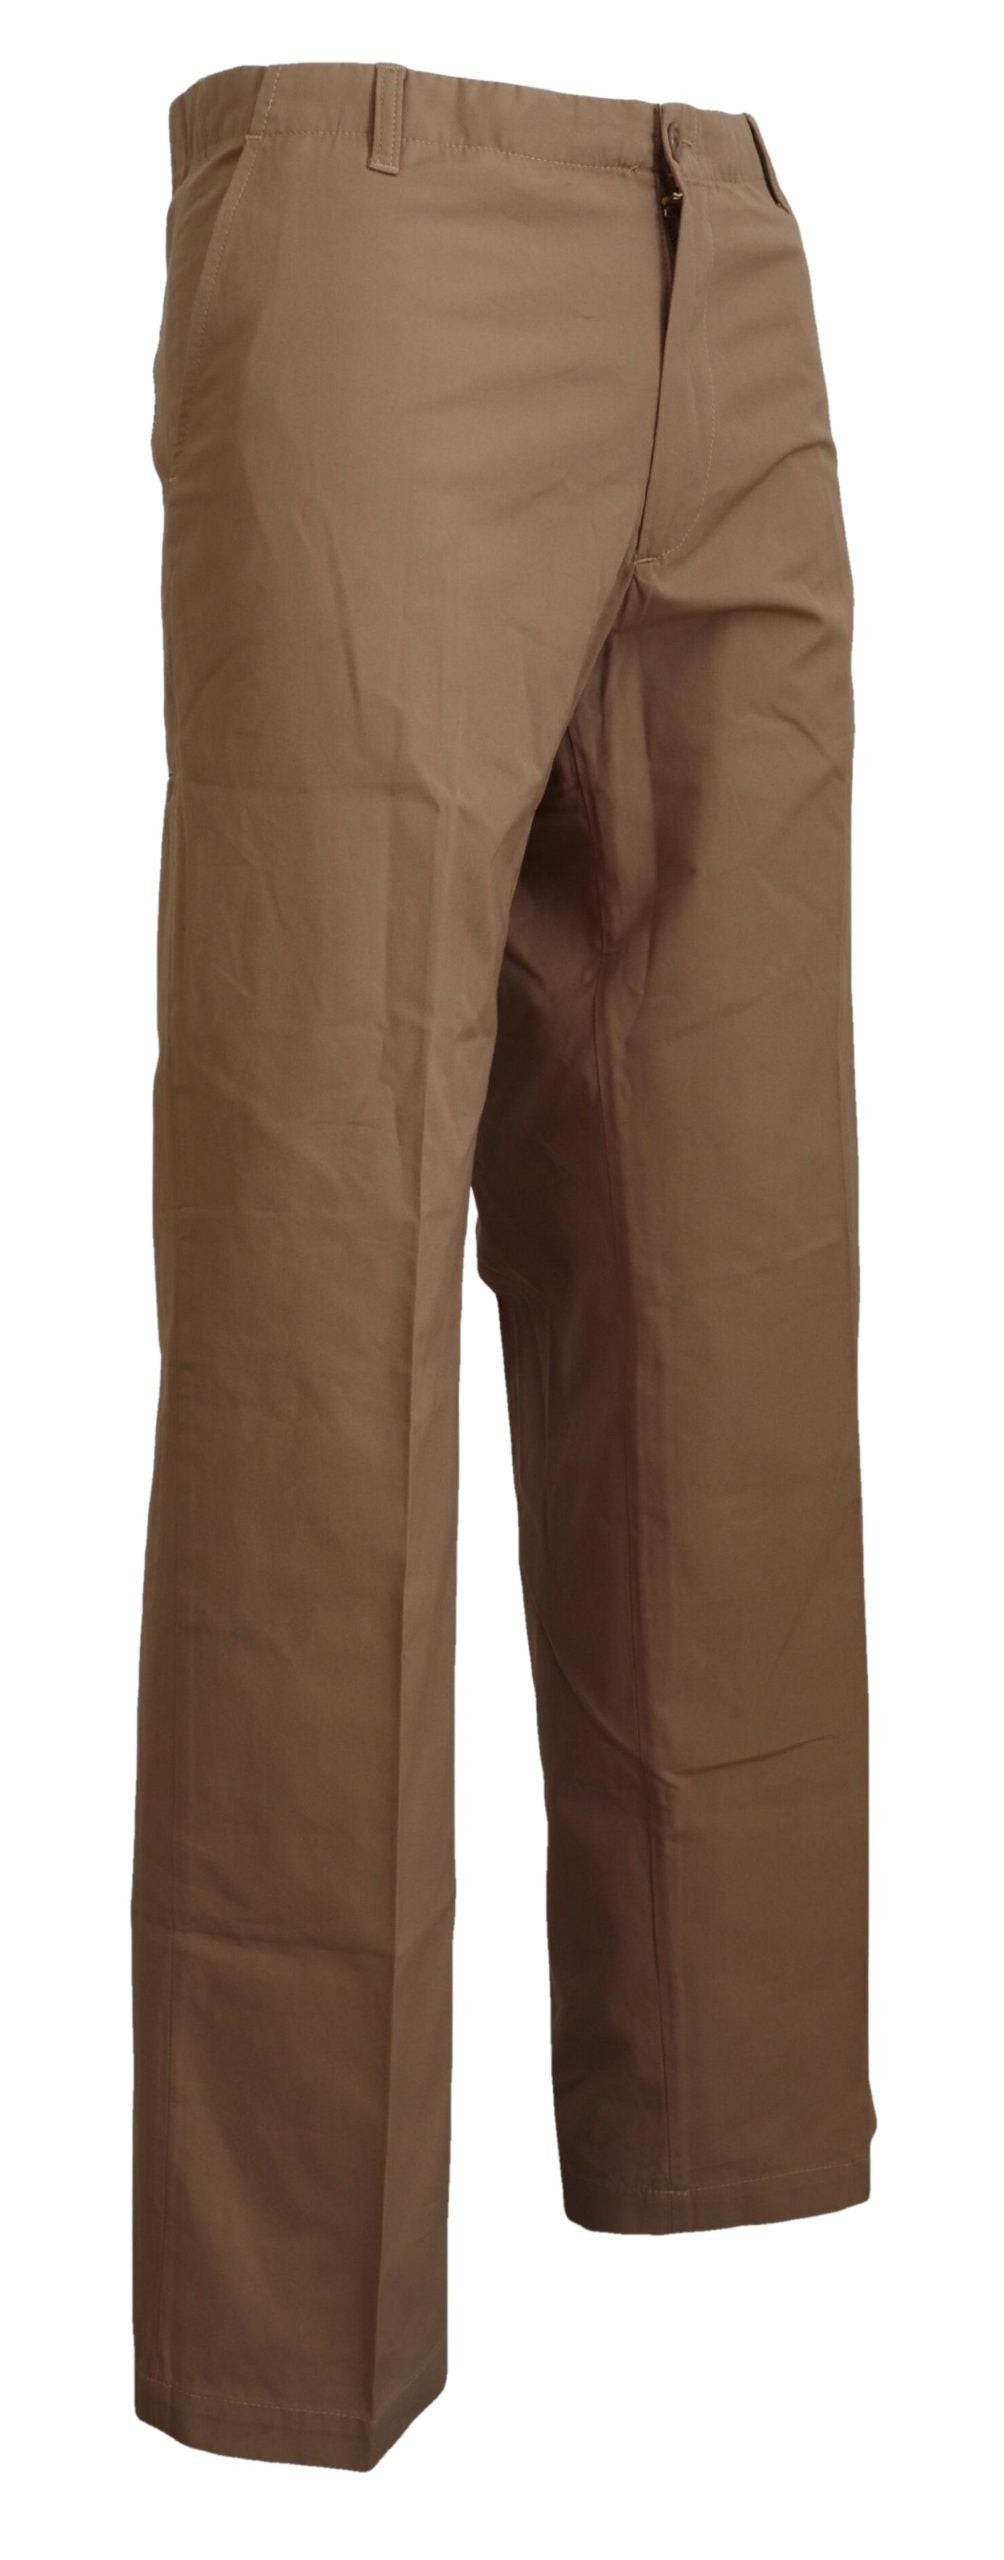 GF Ferre Brown Cotton Straight Fit Chinos Men Pants